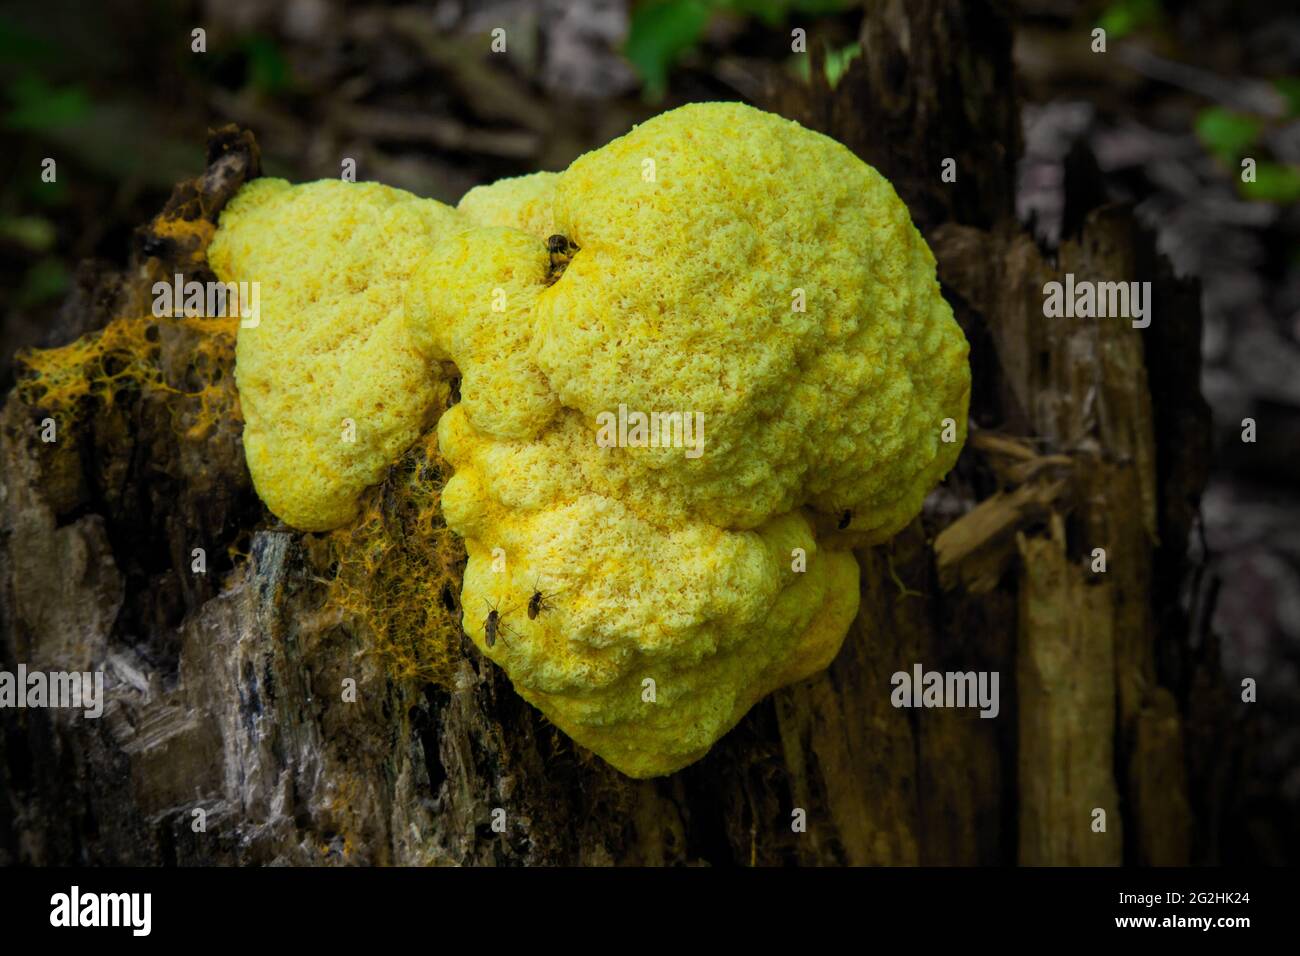 Scrambled-egg Slime is a common slime mold in cool moist forest often found on decaying wood. Extracts show antibiotic activity against Bacillus subti. Stock Photo